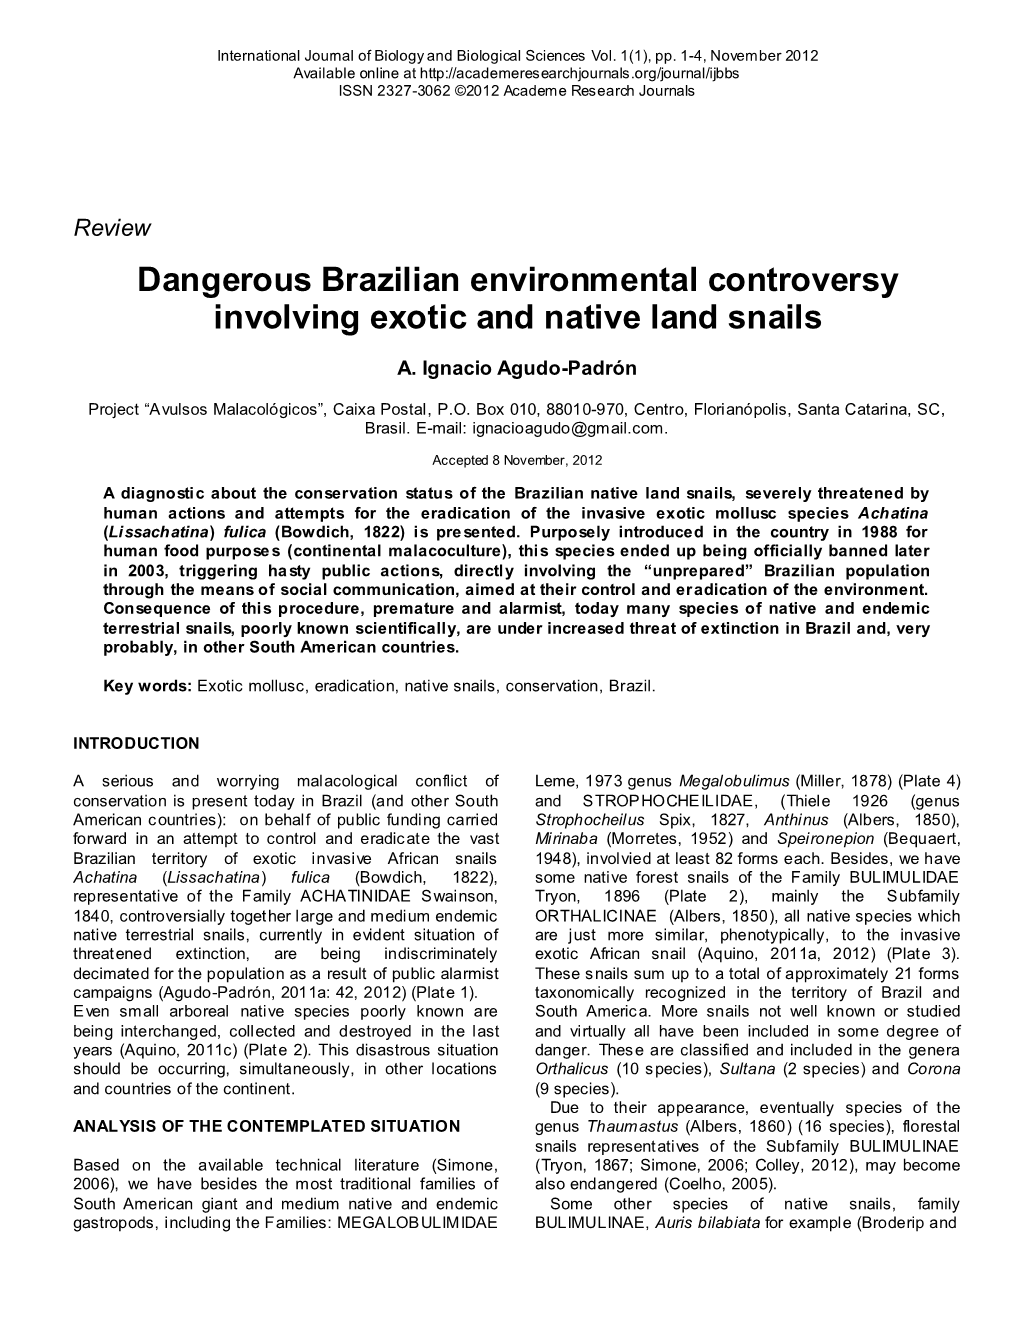 Dangerous Brazilian Environmental Controversy Involving Exotic and Native Land Snails